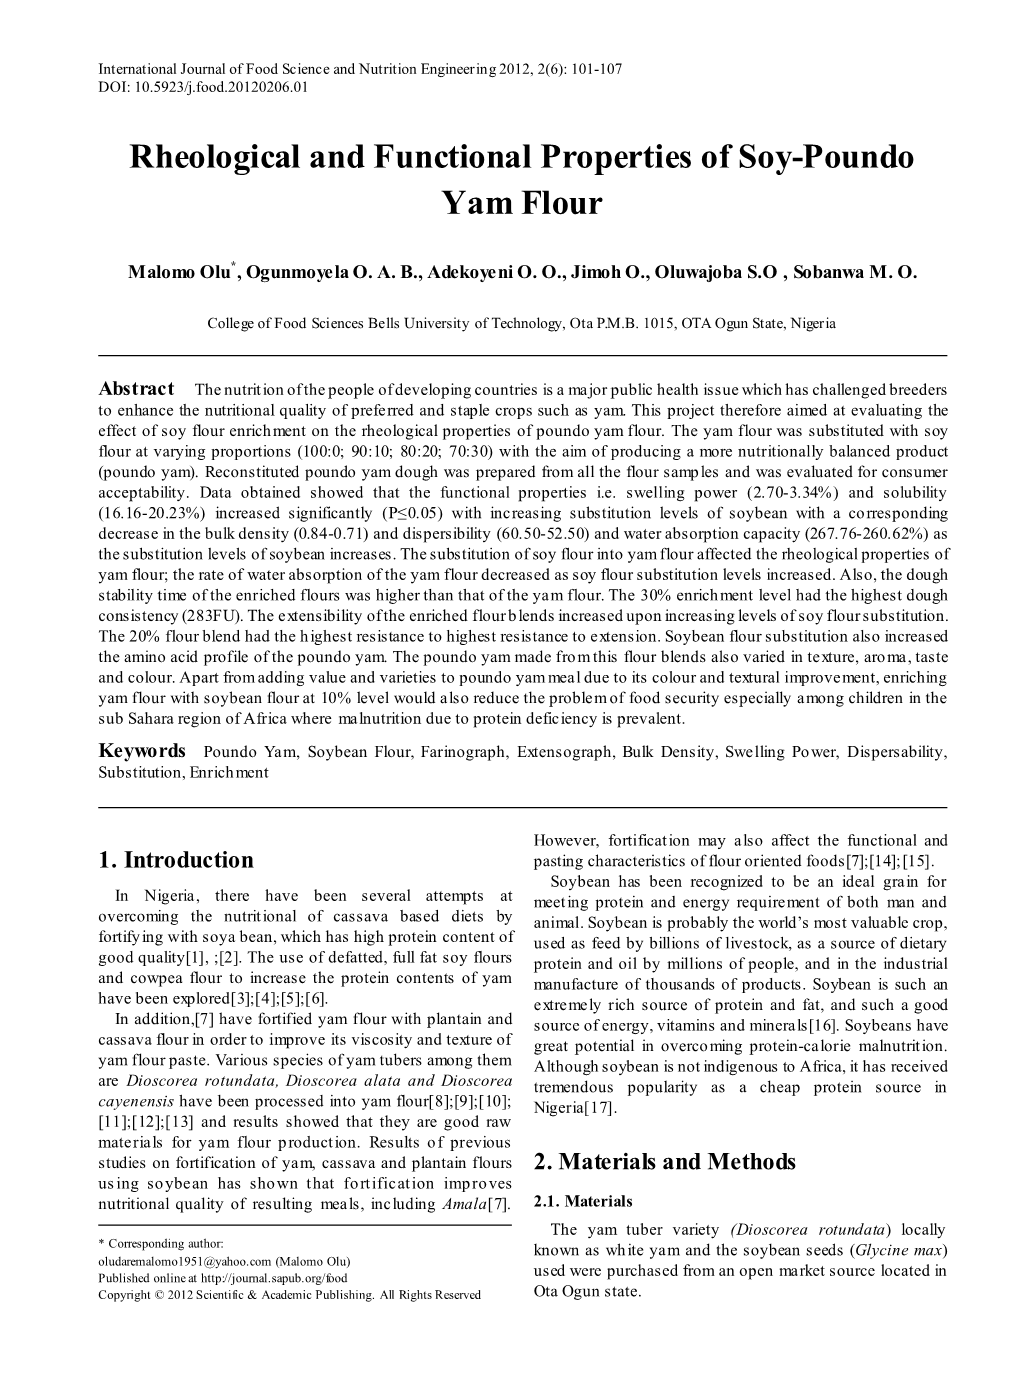 Rheological and Functional Properties of Soy-Poundo Yam Flour